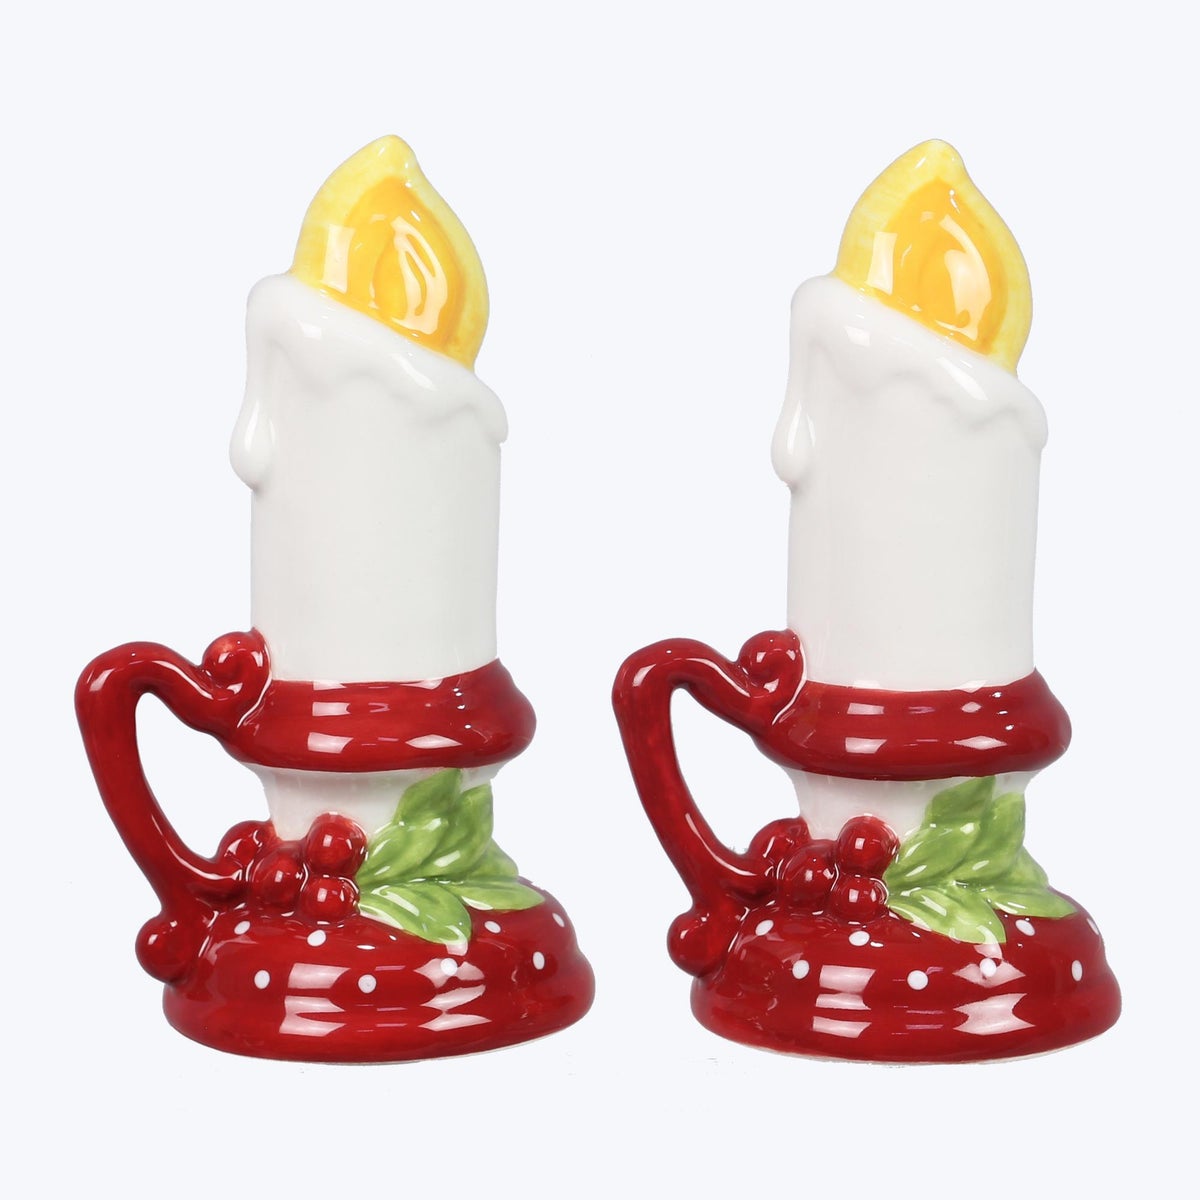 Ceramic Colorful Christmas Candle Stick Salt and Pepper Set. S/P